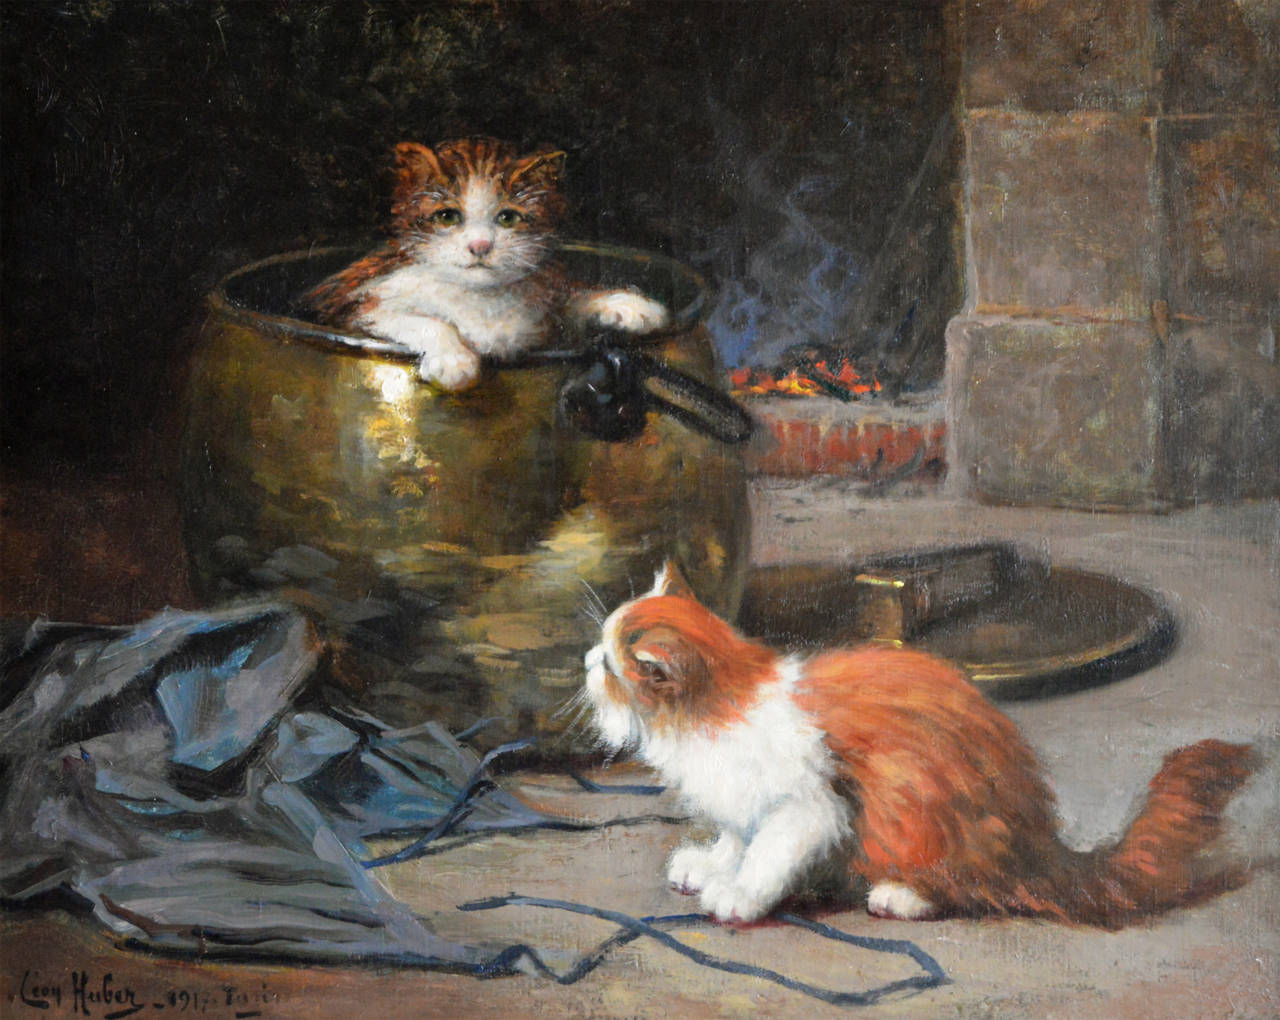 Leon Charles Huber
French, (1858-1928)
The Copper Cauldron
Oil on canvas, signed & dated 1917, Paris
Image size: 20 inches x 25 inches 
Size including frame: 29¼ inches x 34½ inches

Leon Charles Huber, also known as Leo was born on 11